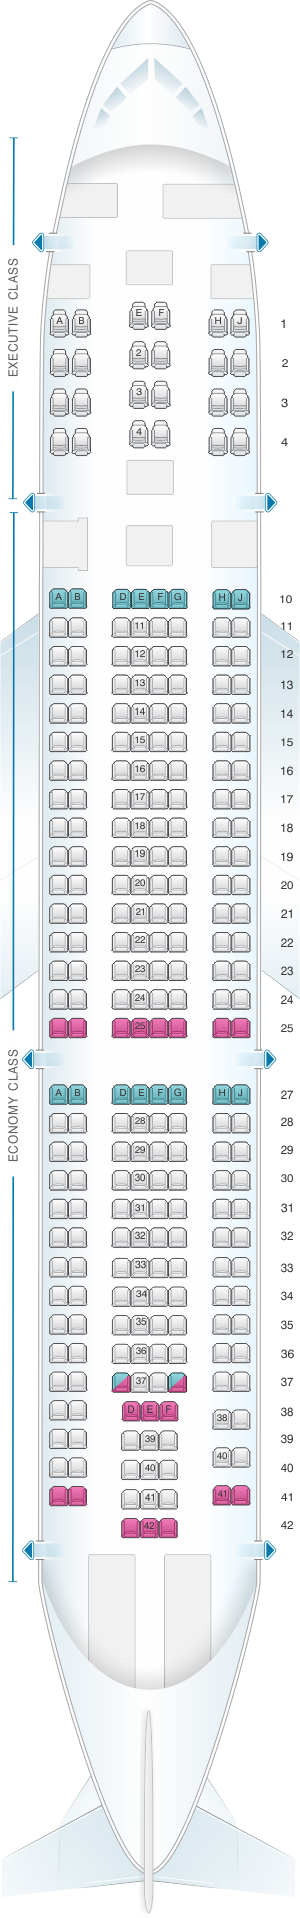 Seat Map Tap Air Portugal Airbus A321 Seatmaestro Images And Photos